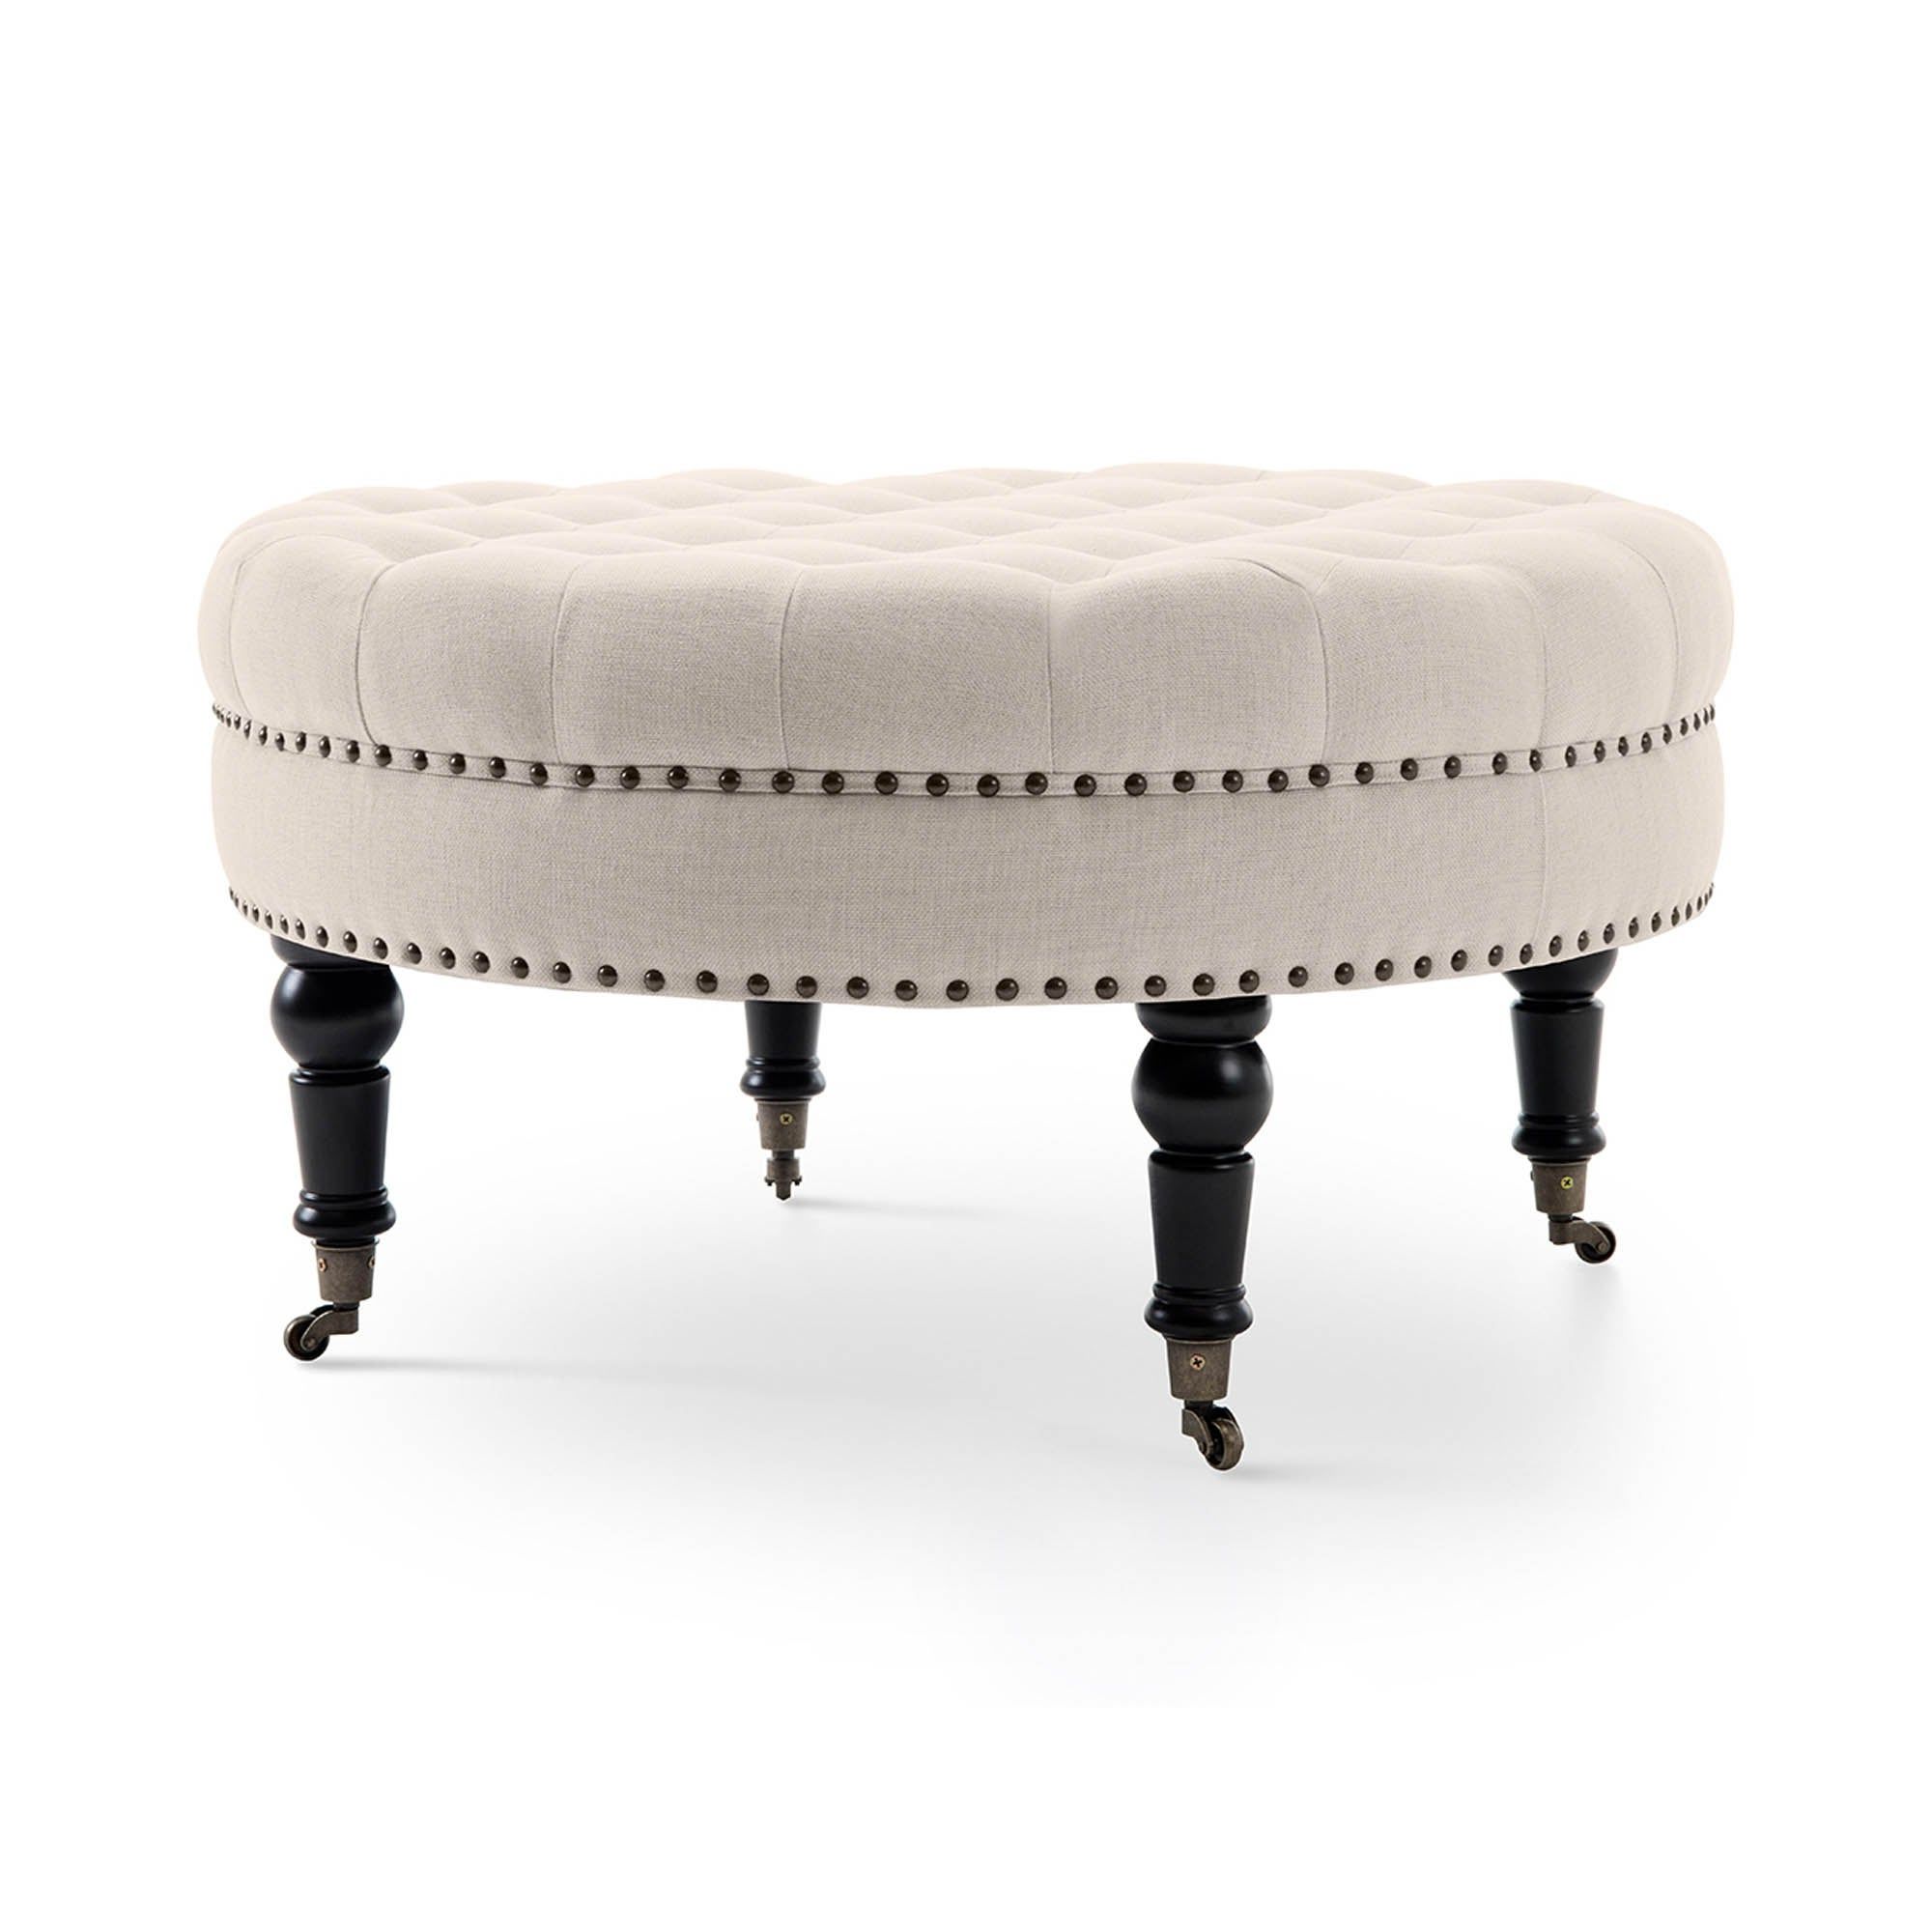 Belleze Large Ottoman Cushion Round Tufted Linen Bench W/ Caster Beige With Most Up To Date Neutral Beige Linen Pouf Ottomans (View 4 of 10)